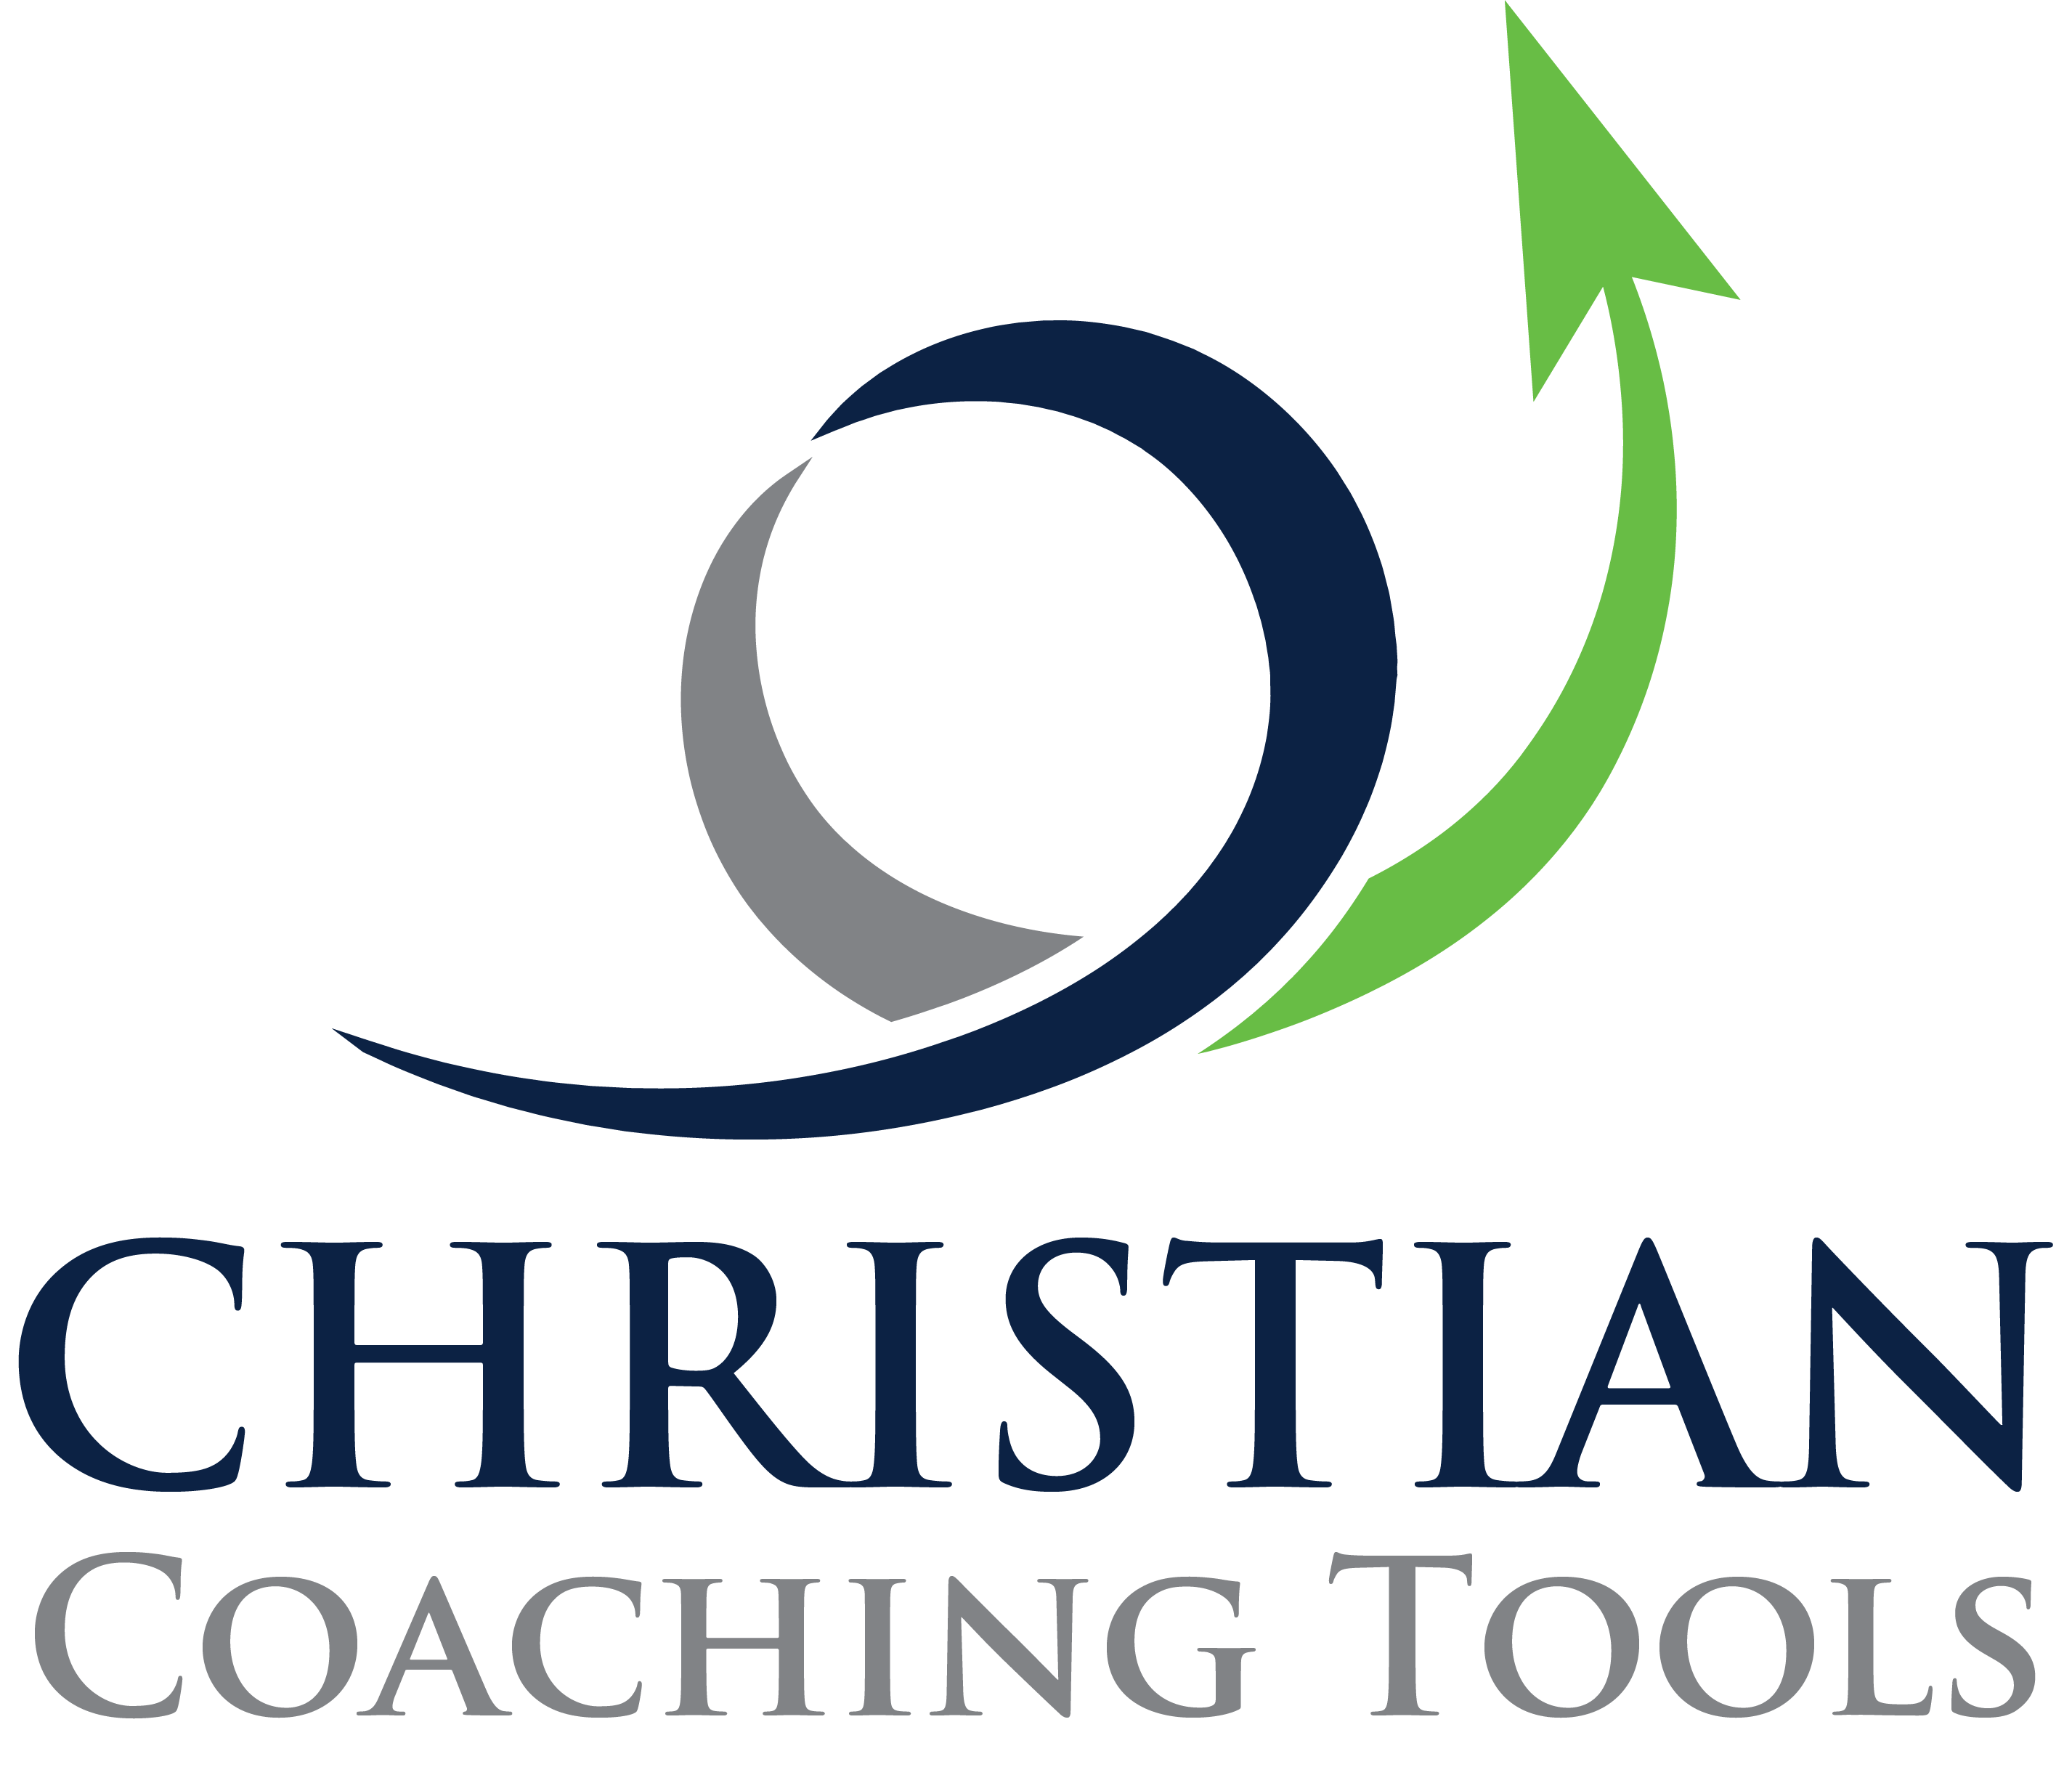 Introducing a new resource for Christian Coaching!